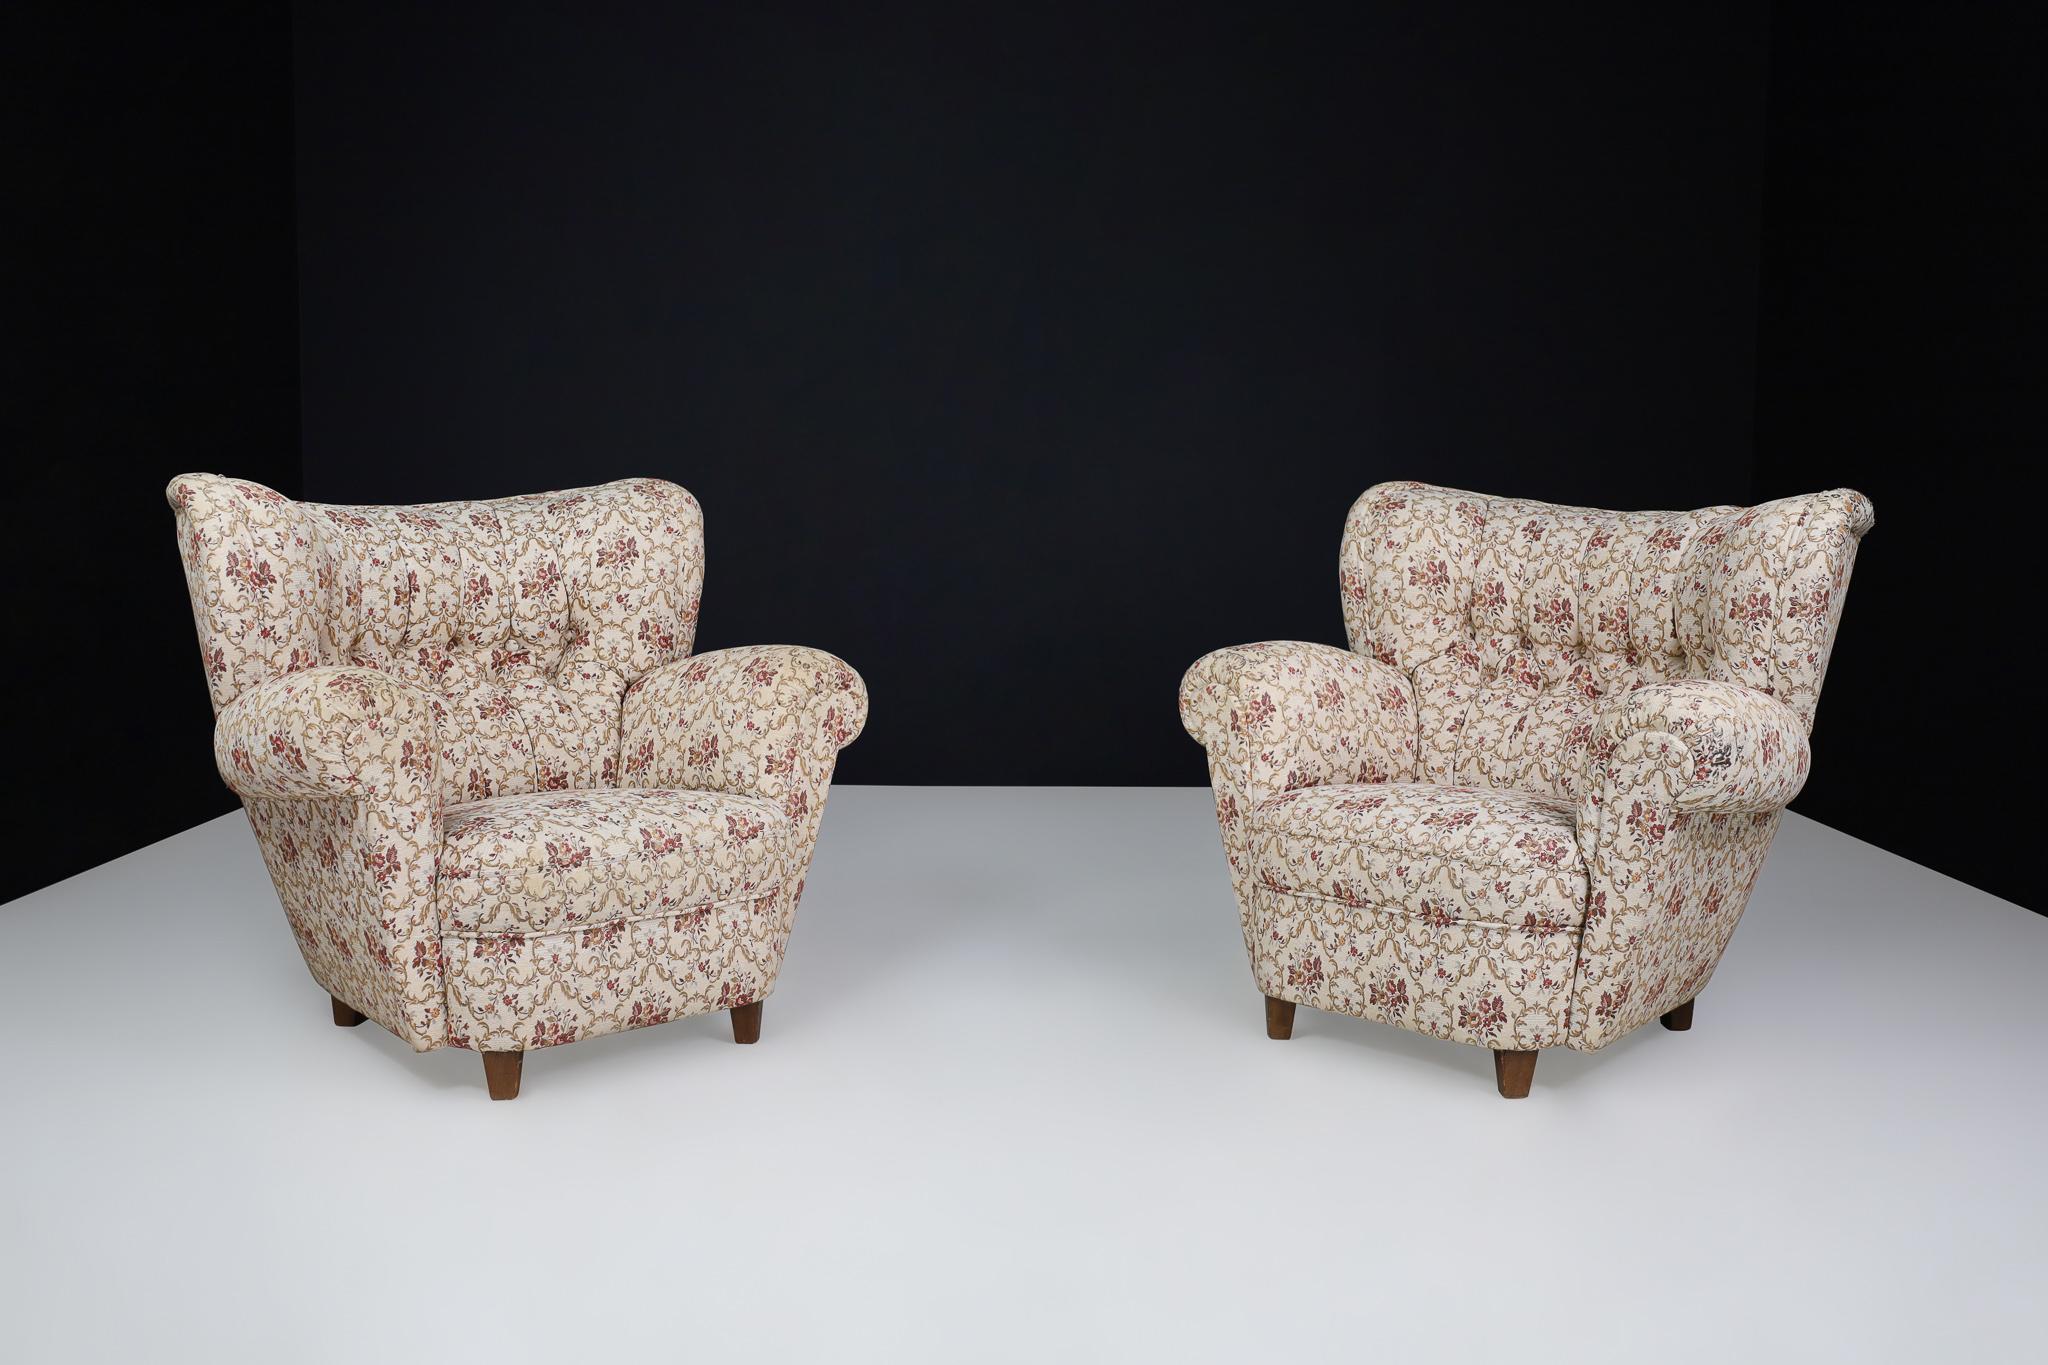 Large Art-Deco Pair Armchairs in Original Floral Upholstery, Praque 1930s For Sale 4